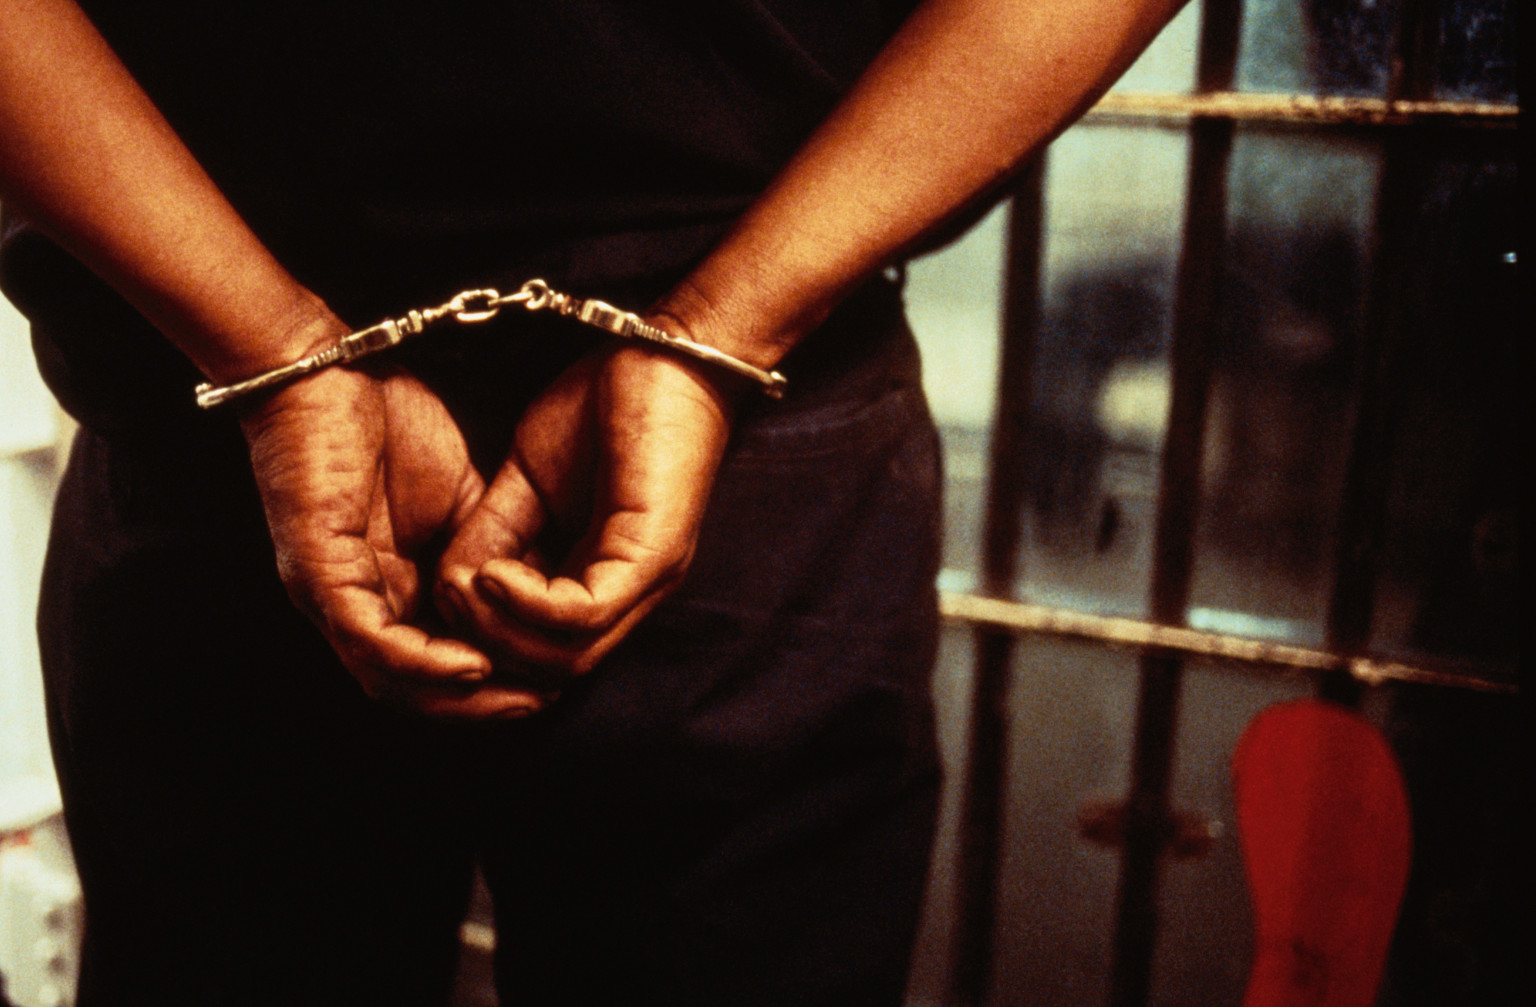 EOCO arrests two persons for alleged romance fraud